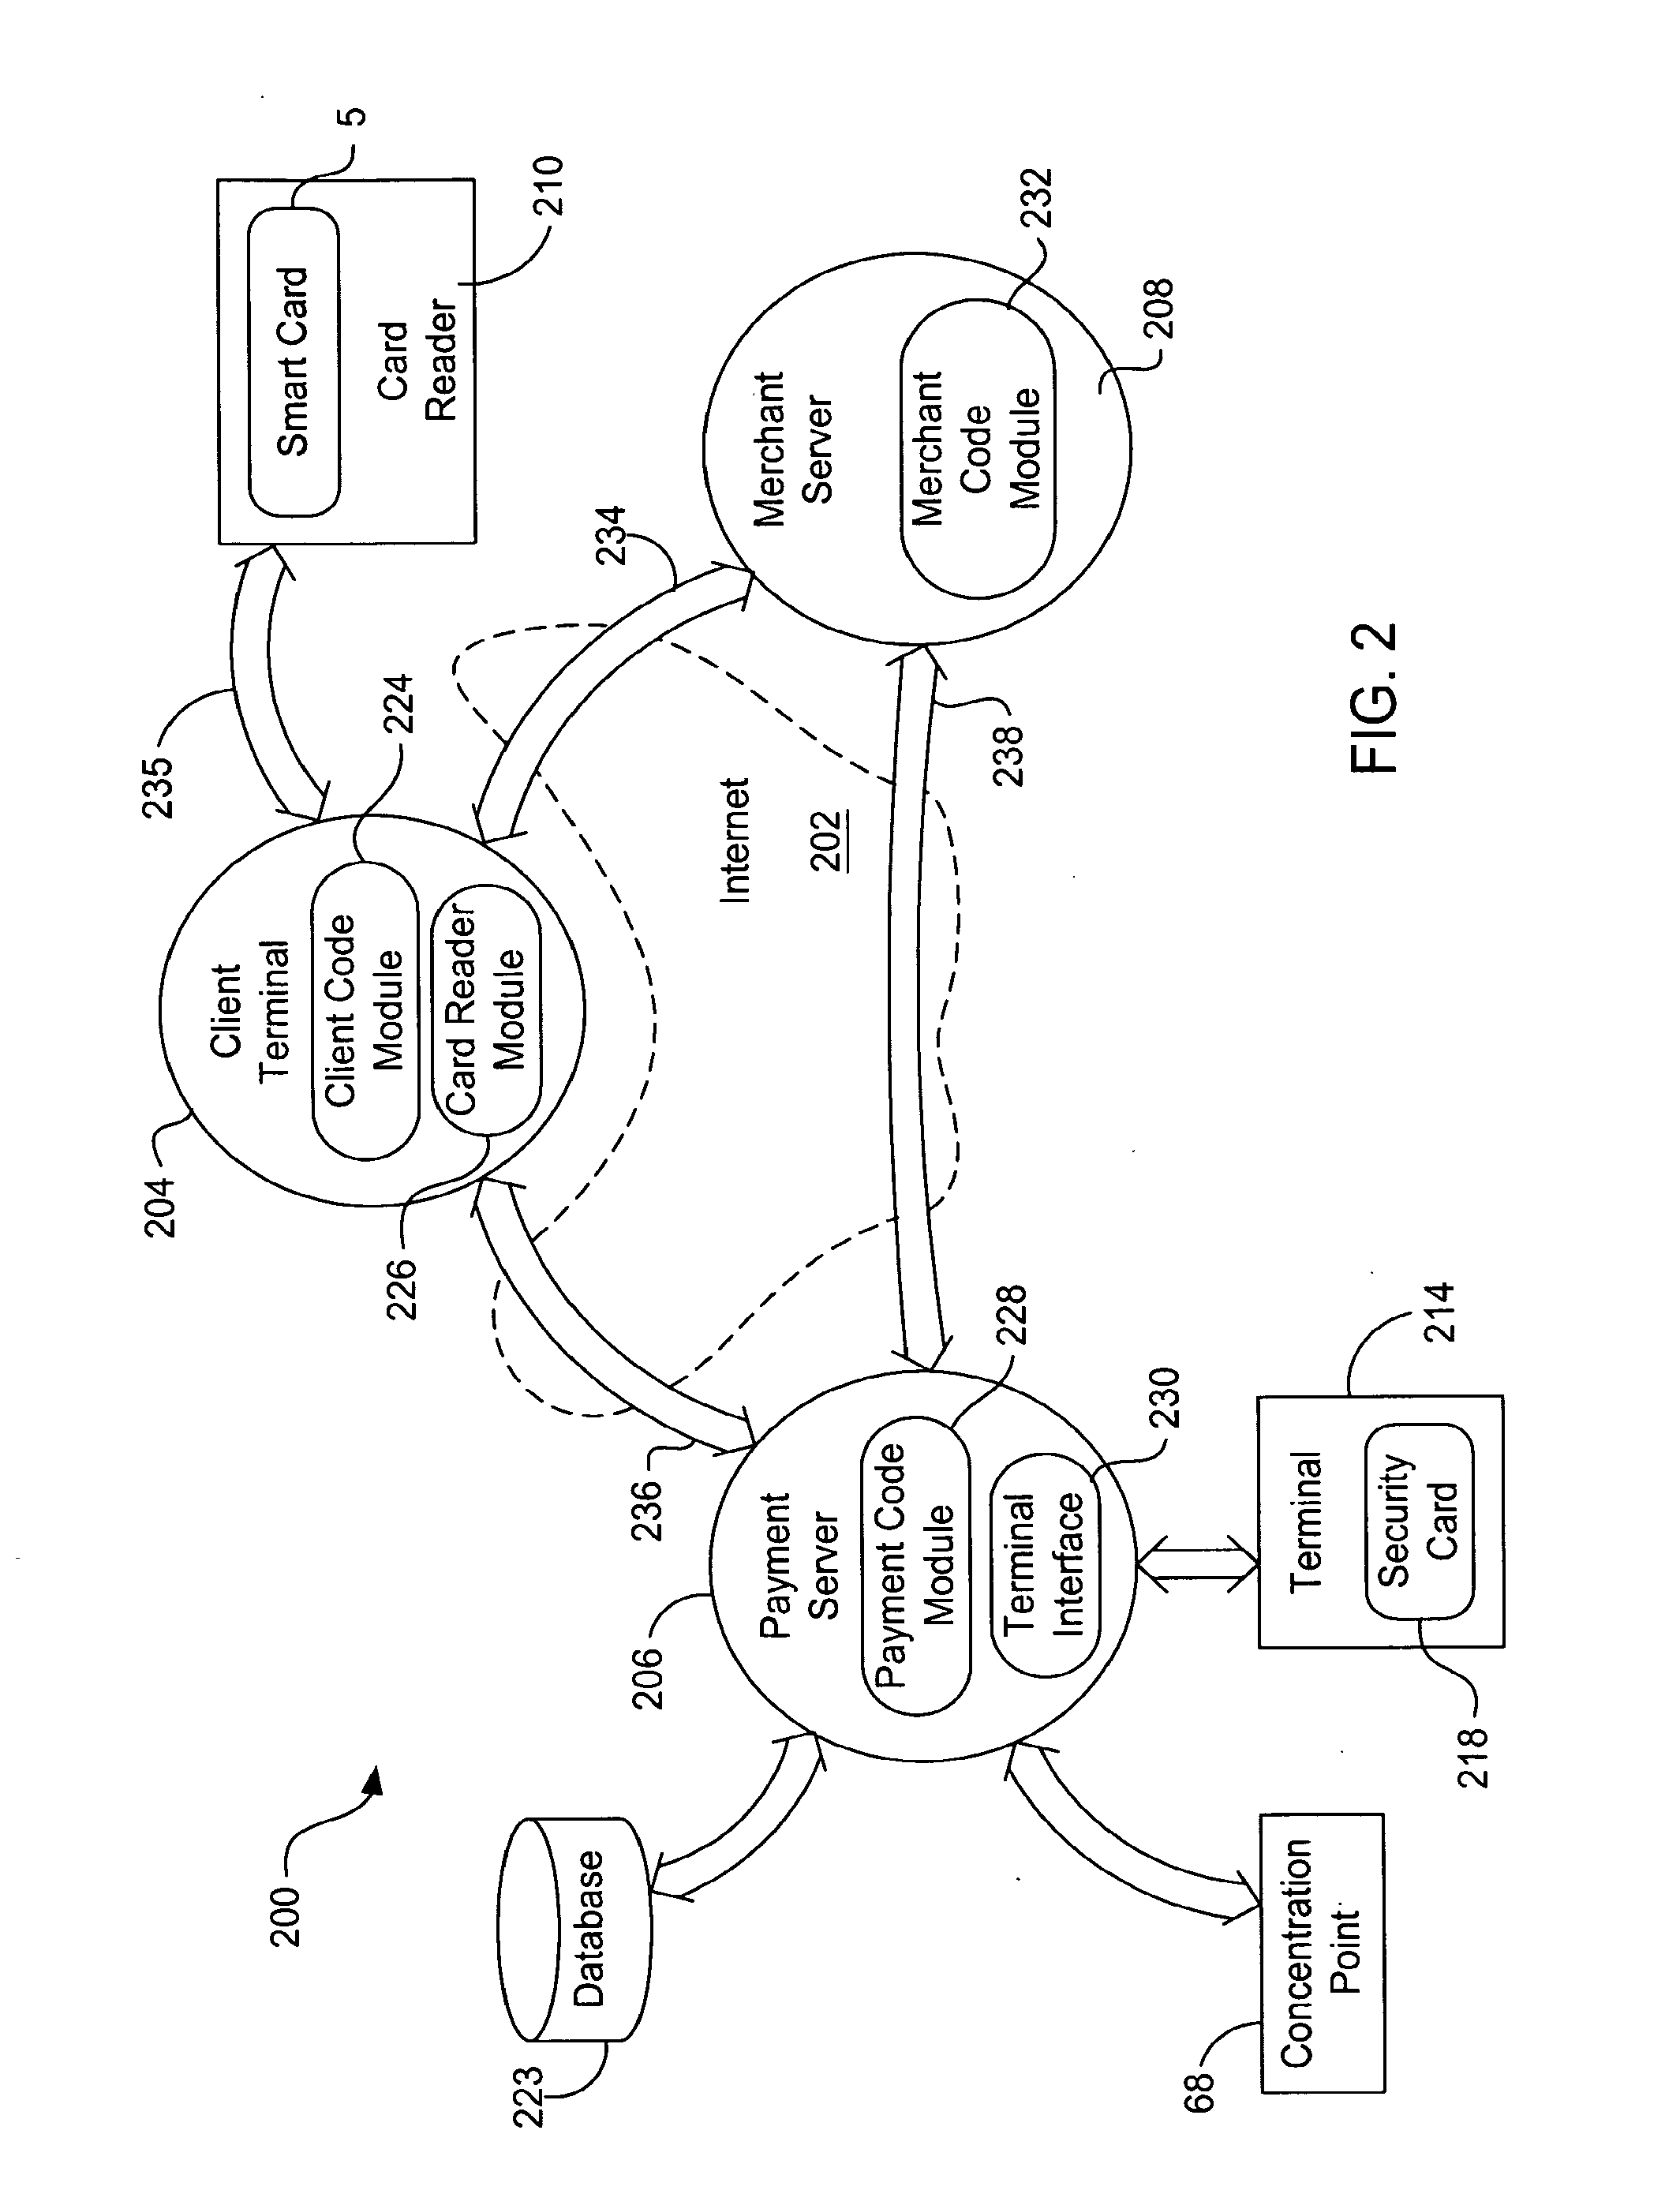 Internet Payment, Authentication And Loading System Using Virtual Smart Card